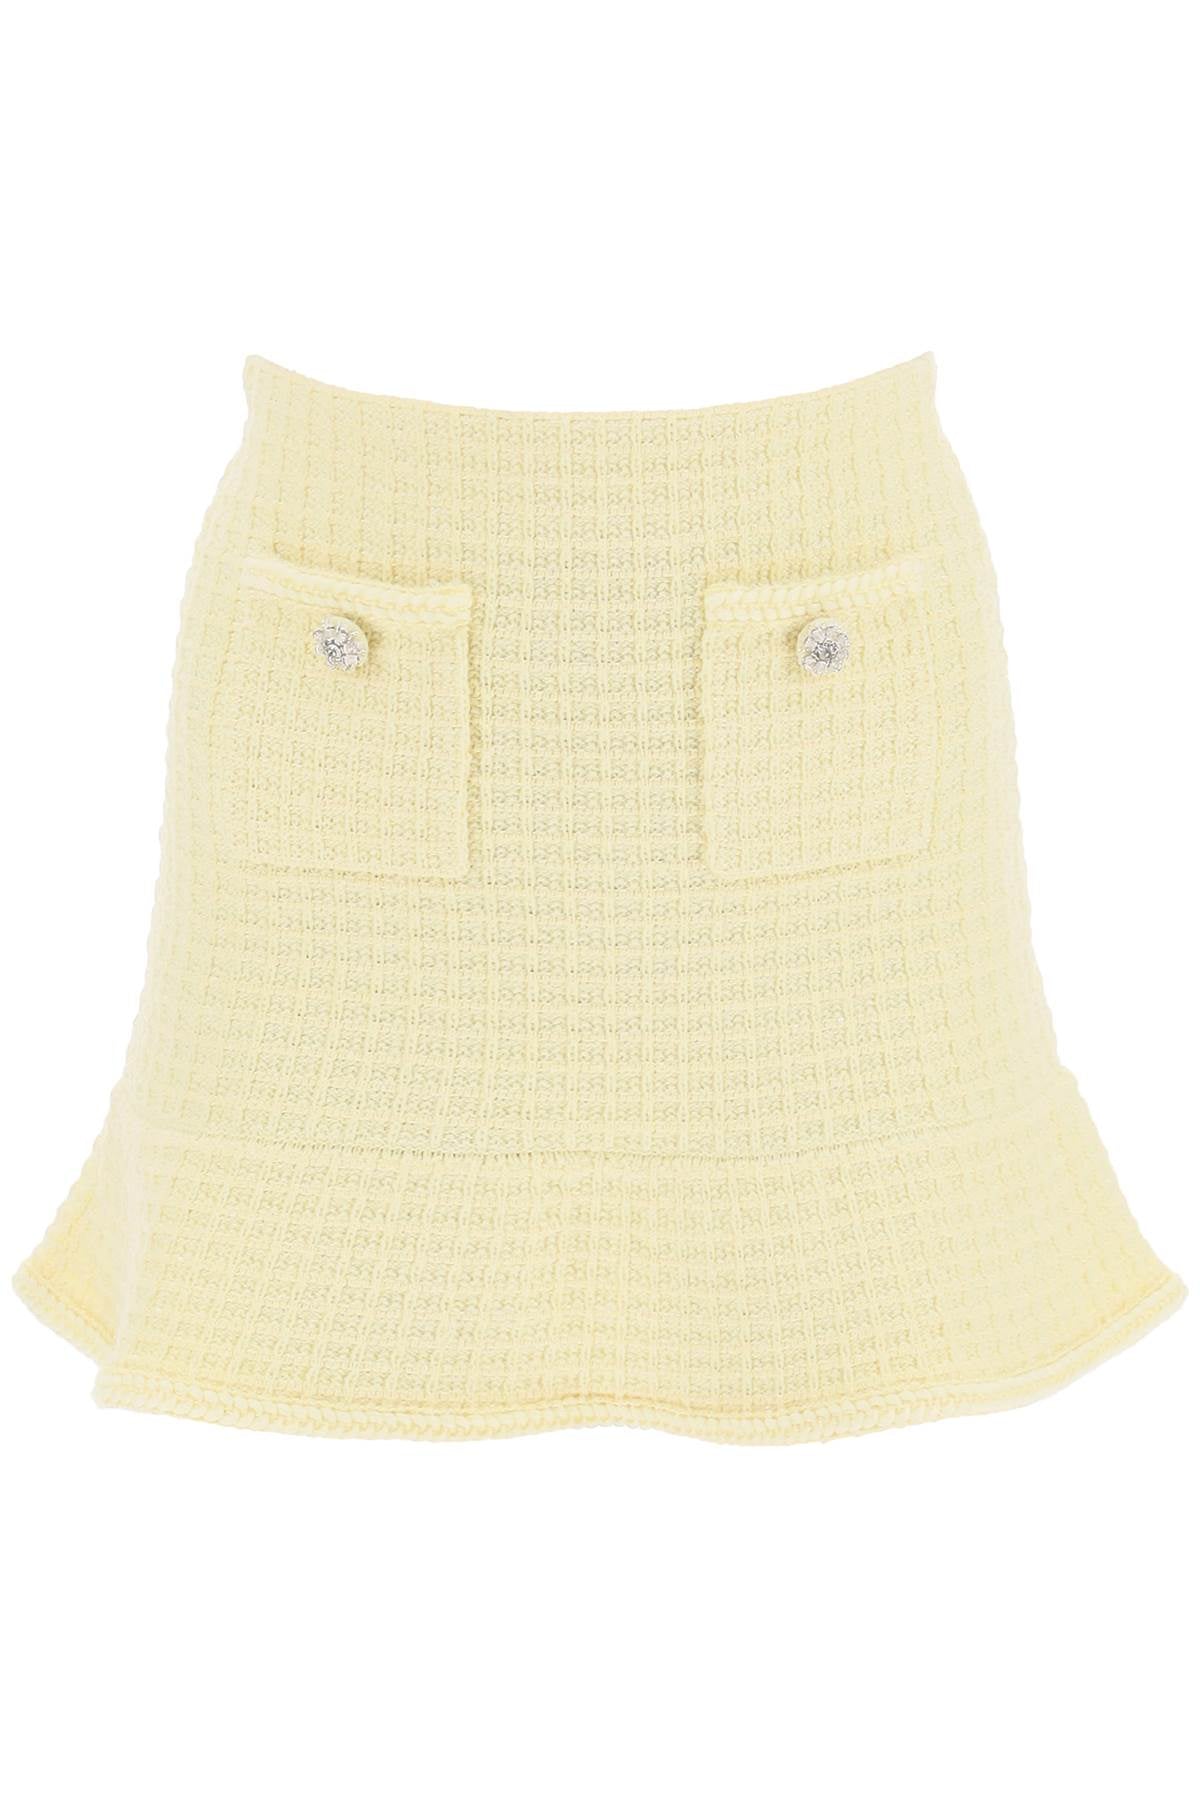 Self Portrait Replace With Double Quoteknitted Mini Skirt With Jewel Buttons   Yellow